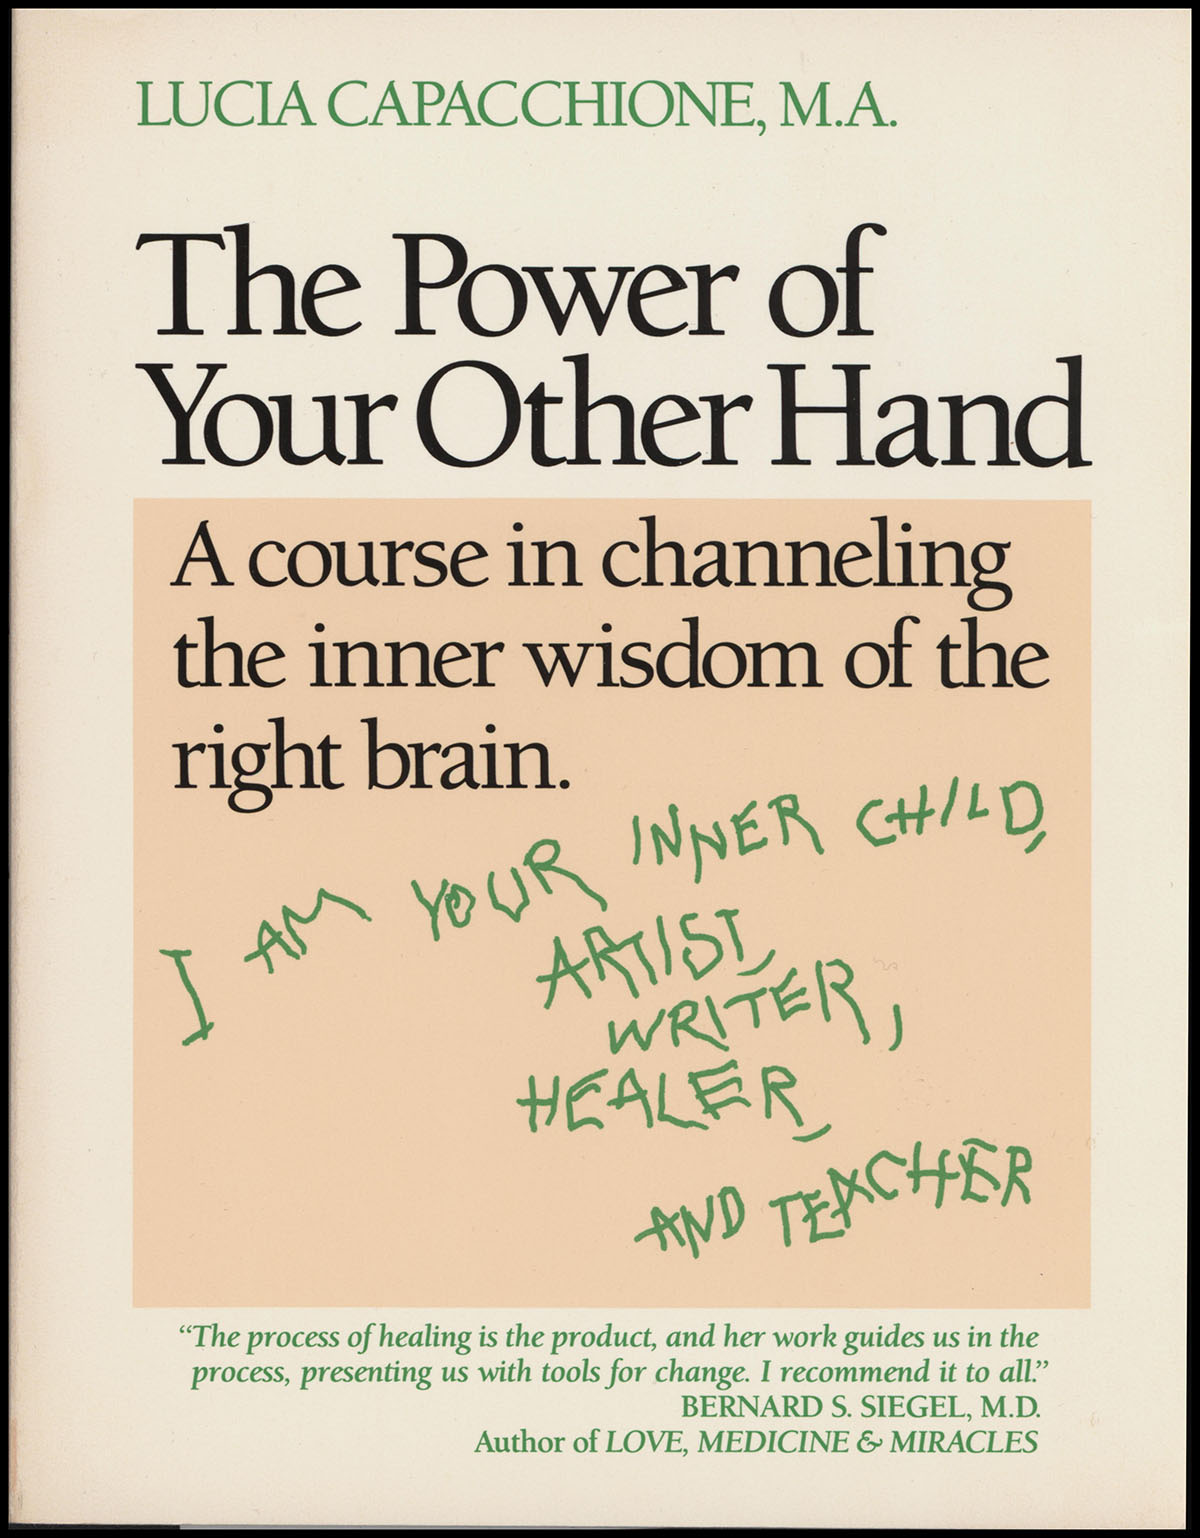 Capacchione, Lucia - The Power of Your Other Hand: A Course in Channeling the Inner Wisdom of the Right Brain